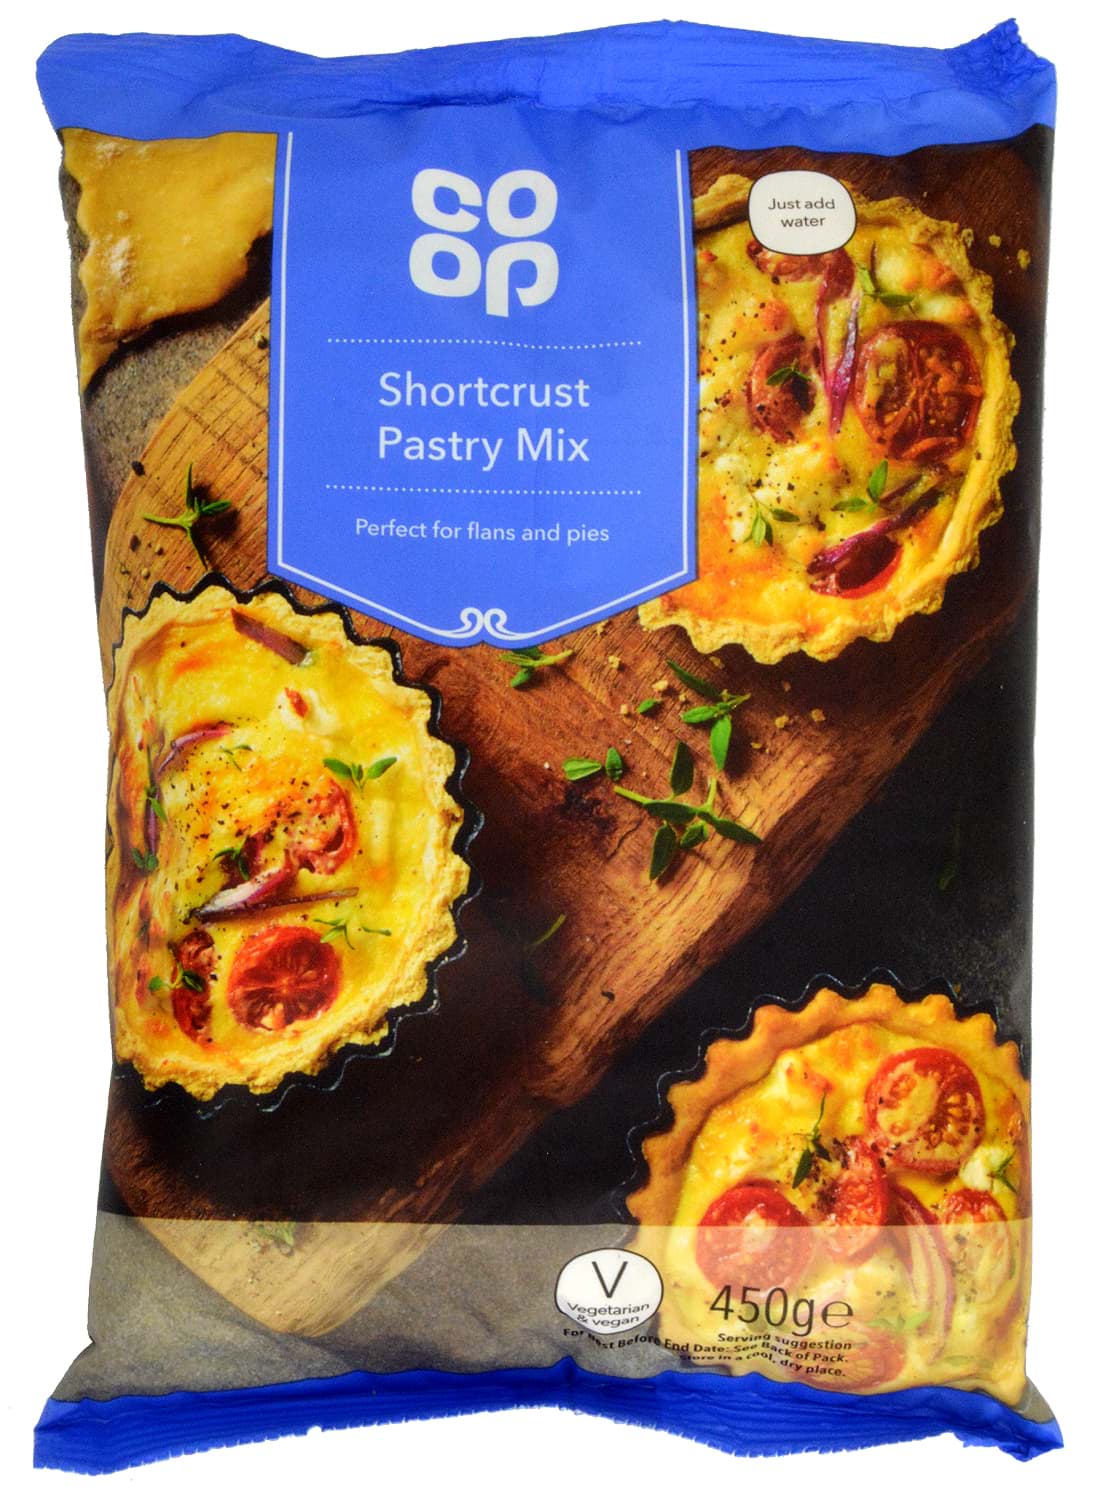 Picture of Co-op Shortcrust Pastry Mix 450g